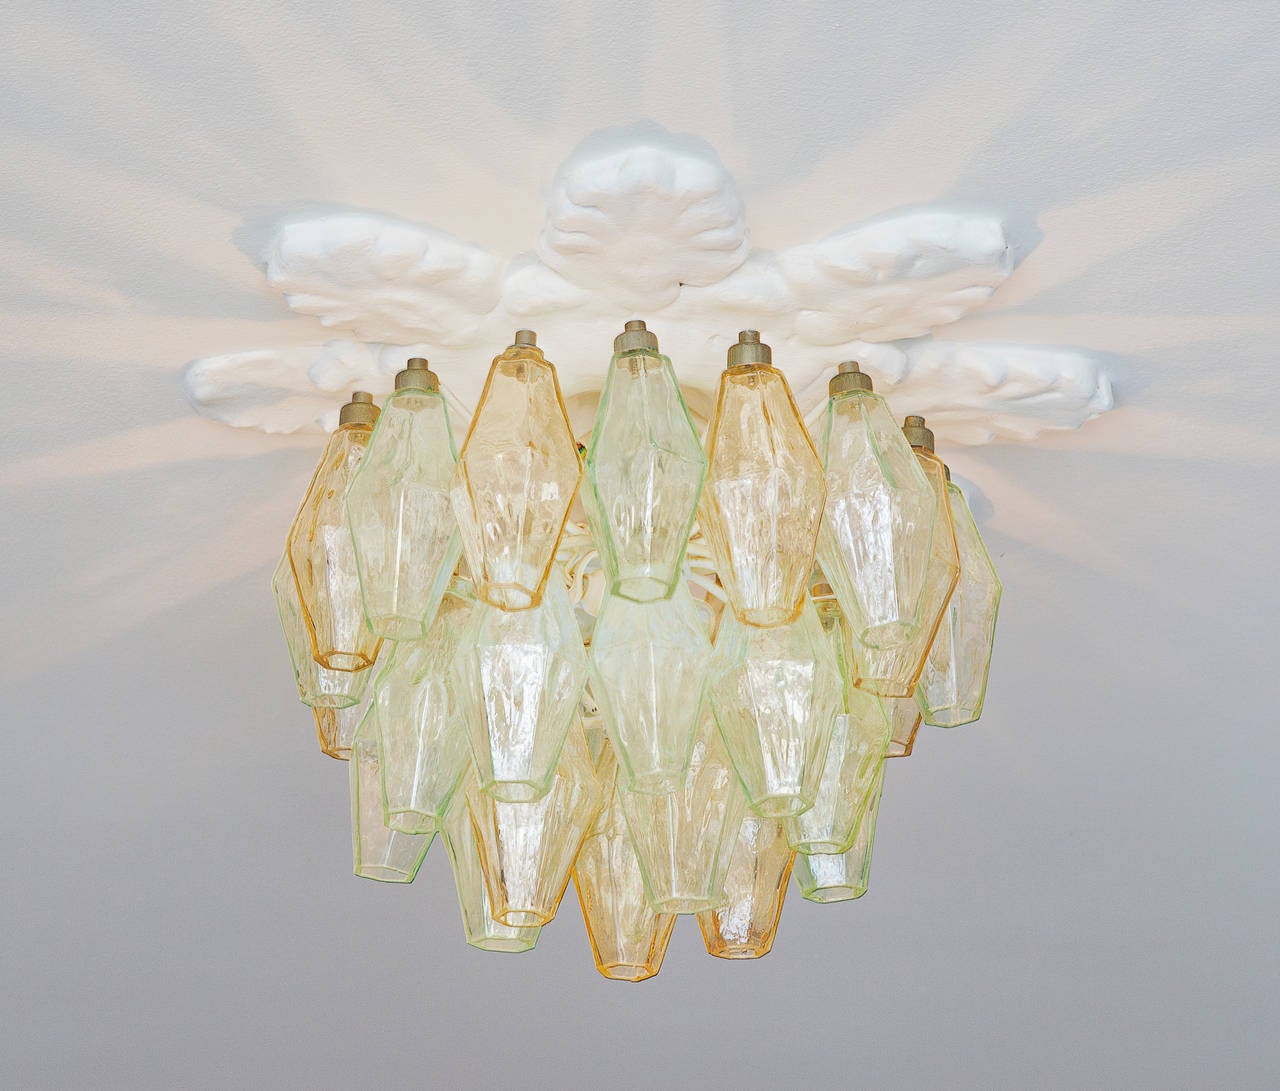 Beautiful vintage Venini polyhedral chandelier. Clear and tinted glass in shades of yellow and turquoise. Brass fittings.